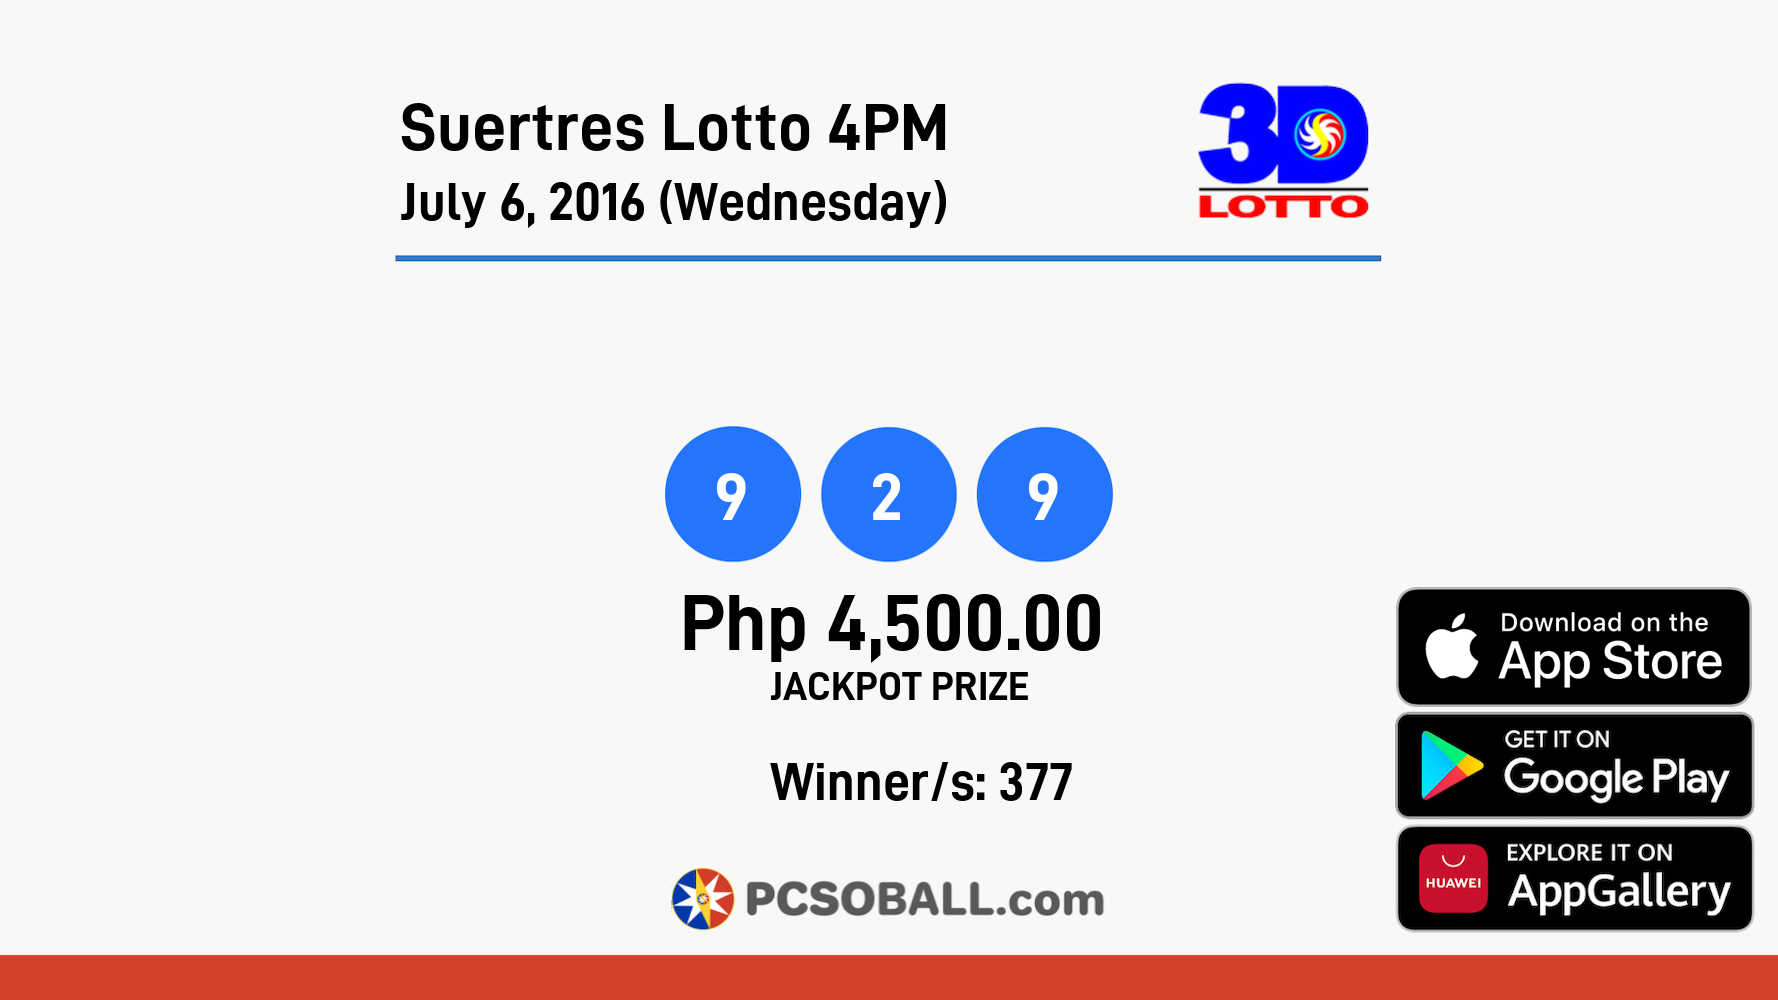 Suertres Lotto 4PM July 6, 2016 (Wednesday) Result